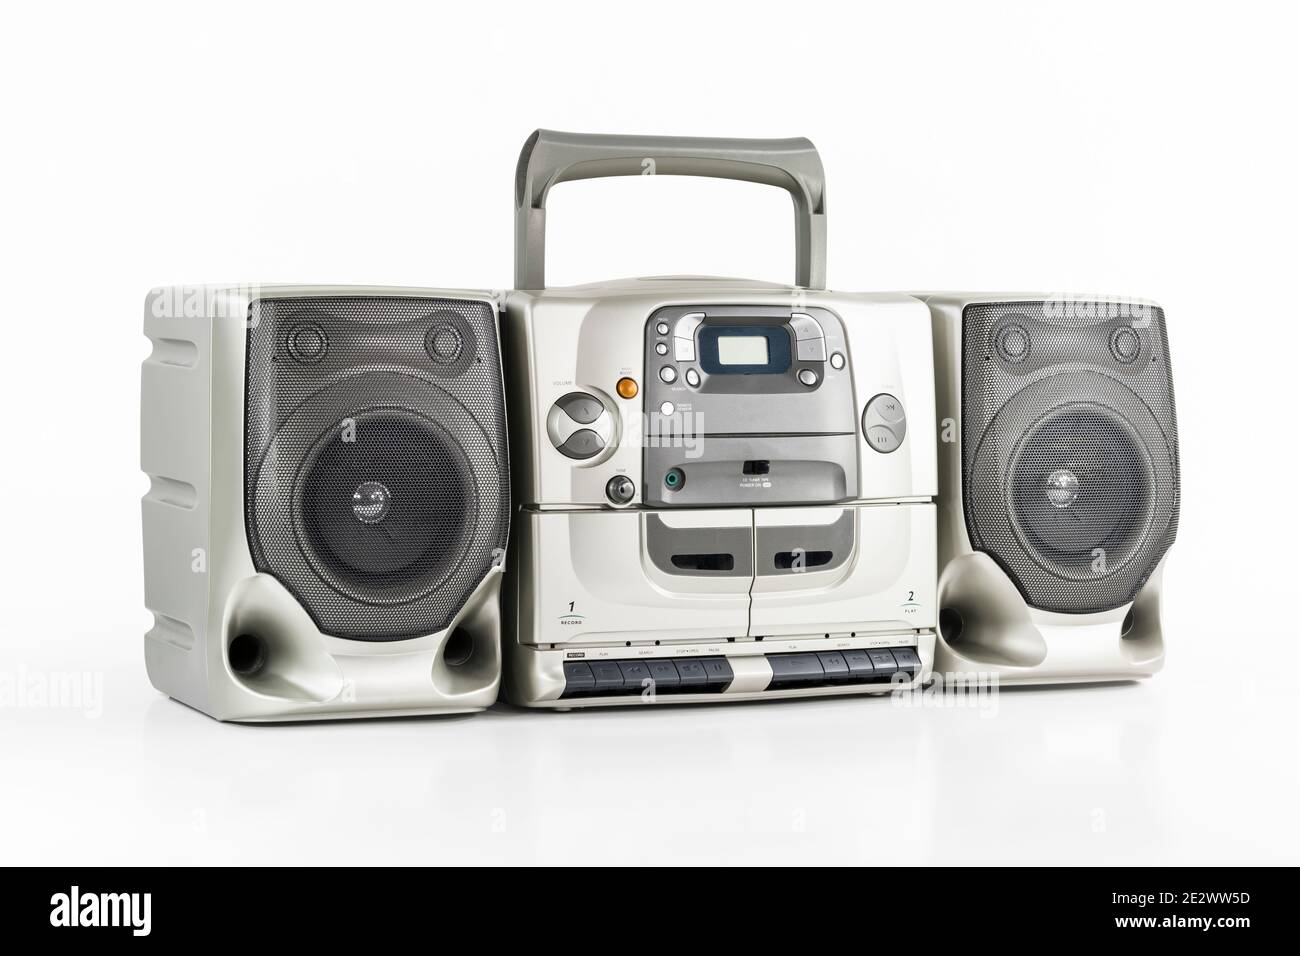 Vintage boom box radio, cd,  stereo cassette tape player and recorder on white. Stock Photo